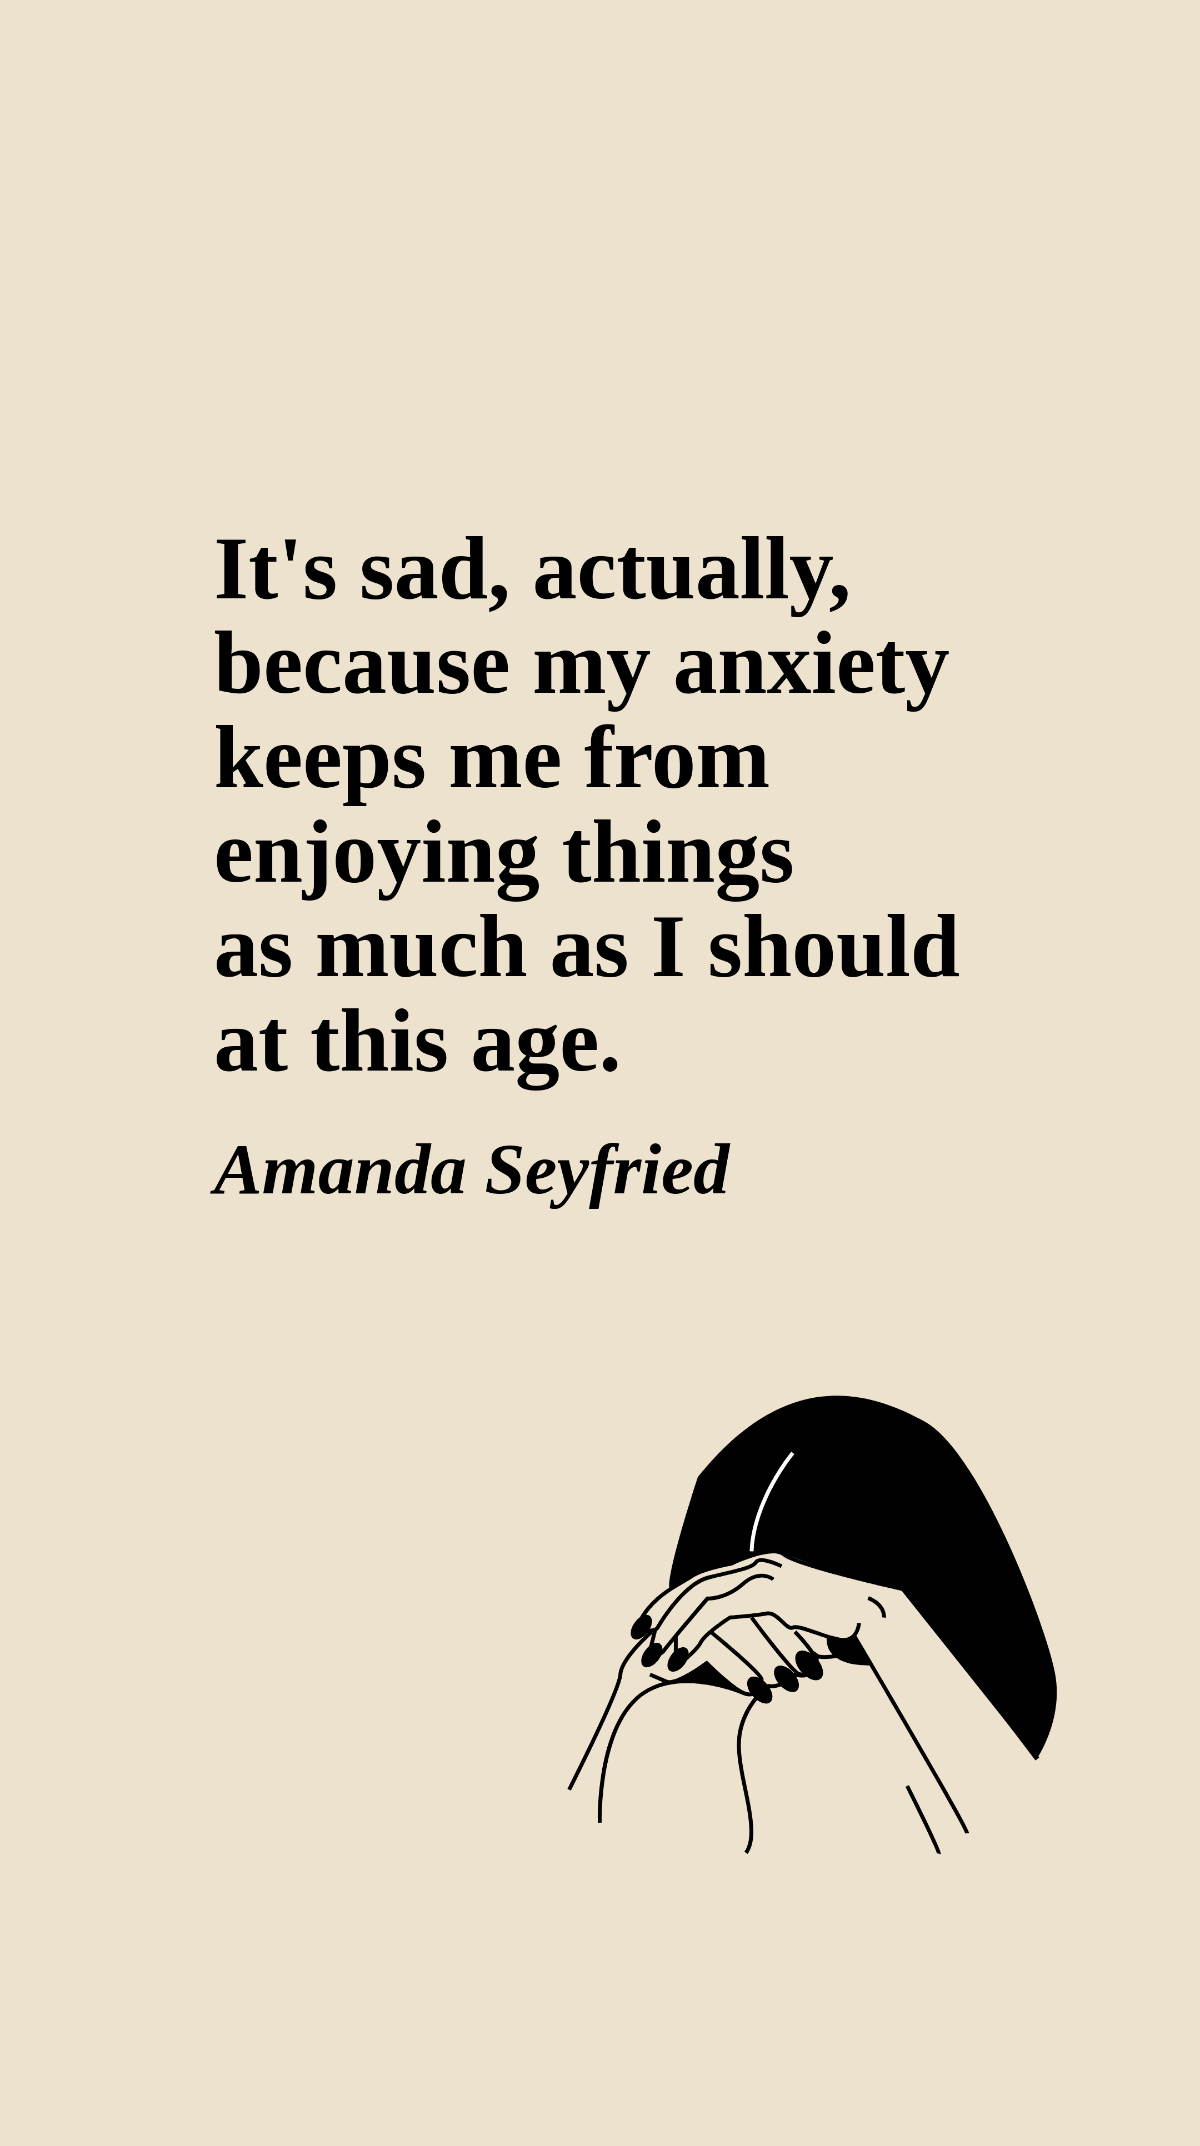 Amanda Seyfried - It's sad, actually, because my anxiety keeps me from enjoying things as much as I should at this age. Template